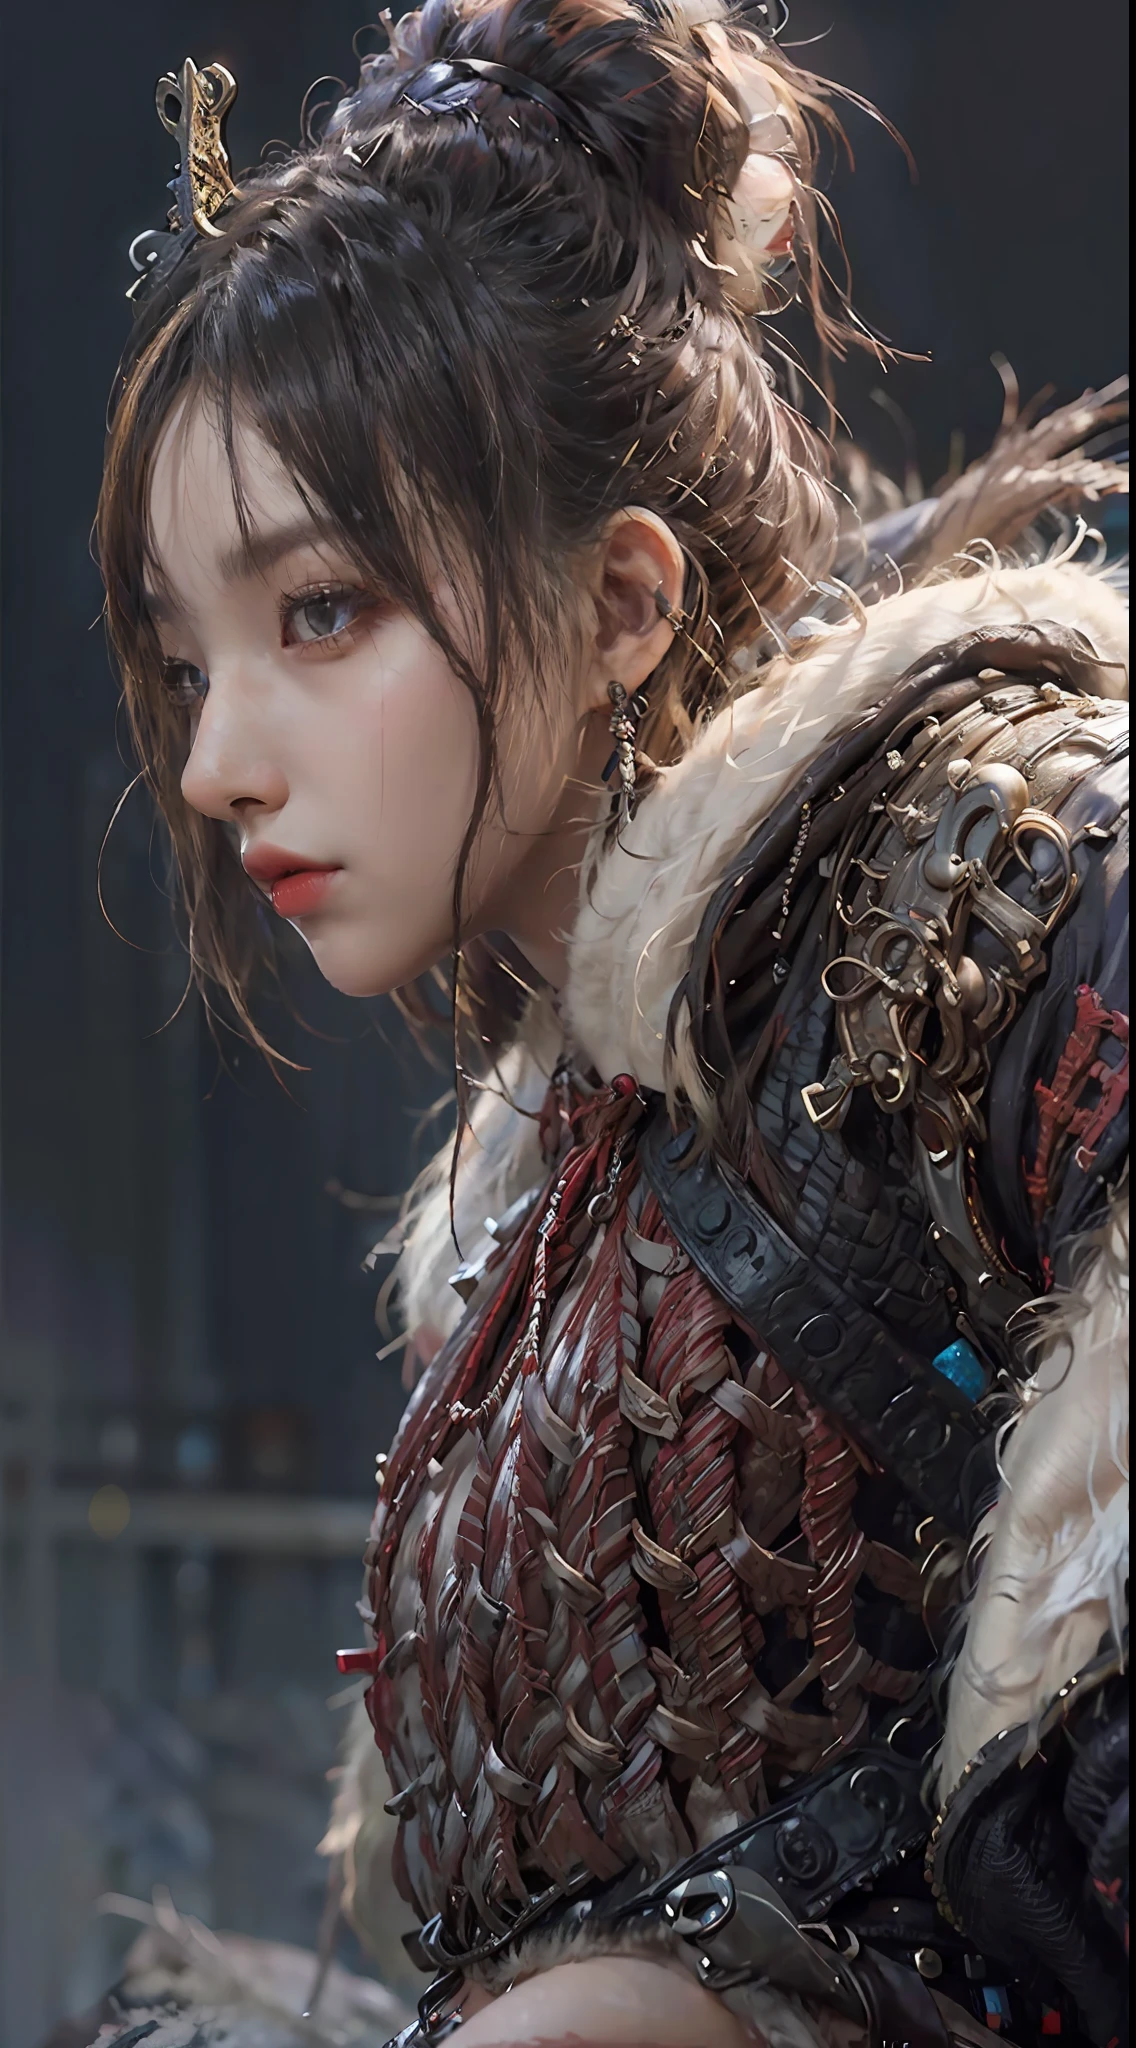 ((Unreal Engine 5)), Realistic rendering, Excellent, (Full set of samurai armor), (Cuirassiers), (Cloak), (The samurai were at the helm), looking on camera, Stand in the studio, Beautiful face, Makeup, CGImix, (Photorealism:1.2), ultrarealistic uhd face,, Slim waist, Hourglass figure, Half body, ((Glowing skin)), ((Shiny skin)), Realistic body, ((She has sexy bodies)), ((Clean skin)), Photorealistic, Bokeh, Motion blur, Masterpiece, A high resolution, 1080p, Super detail, Textured skin